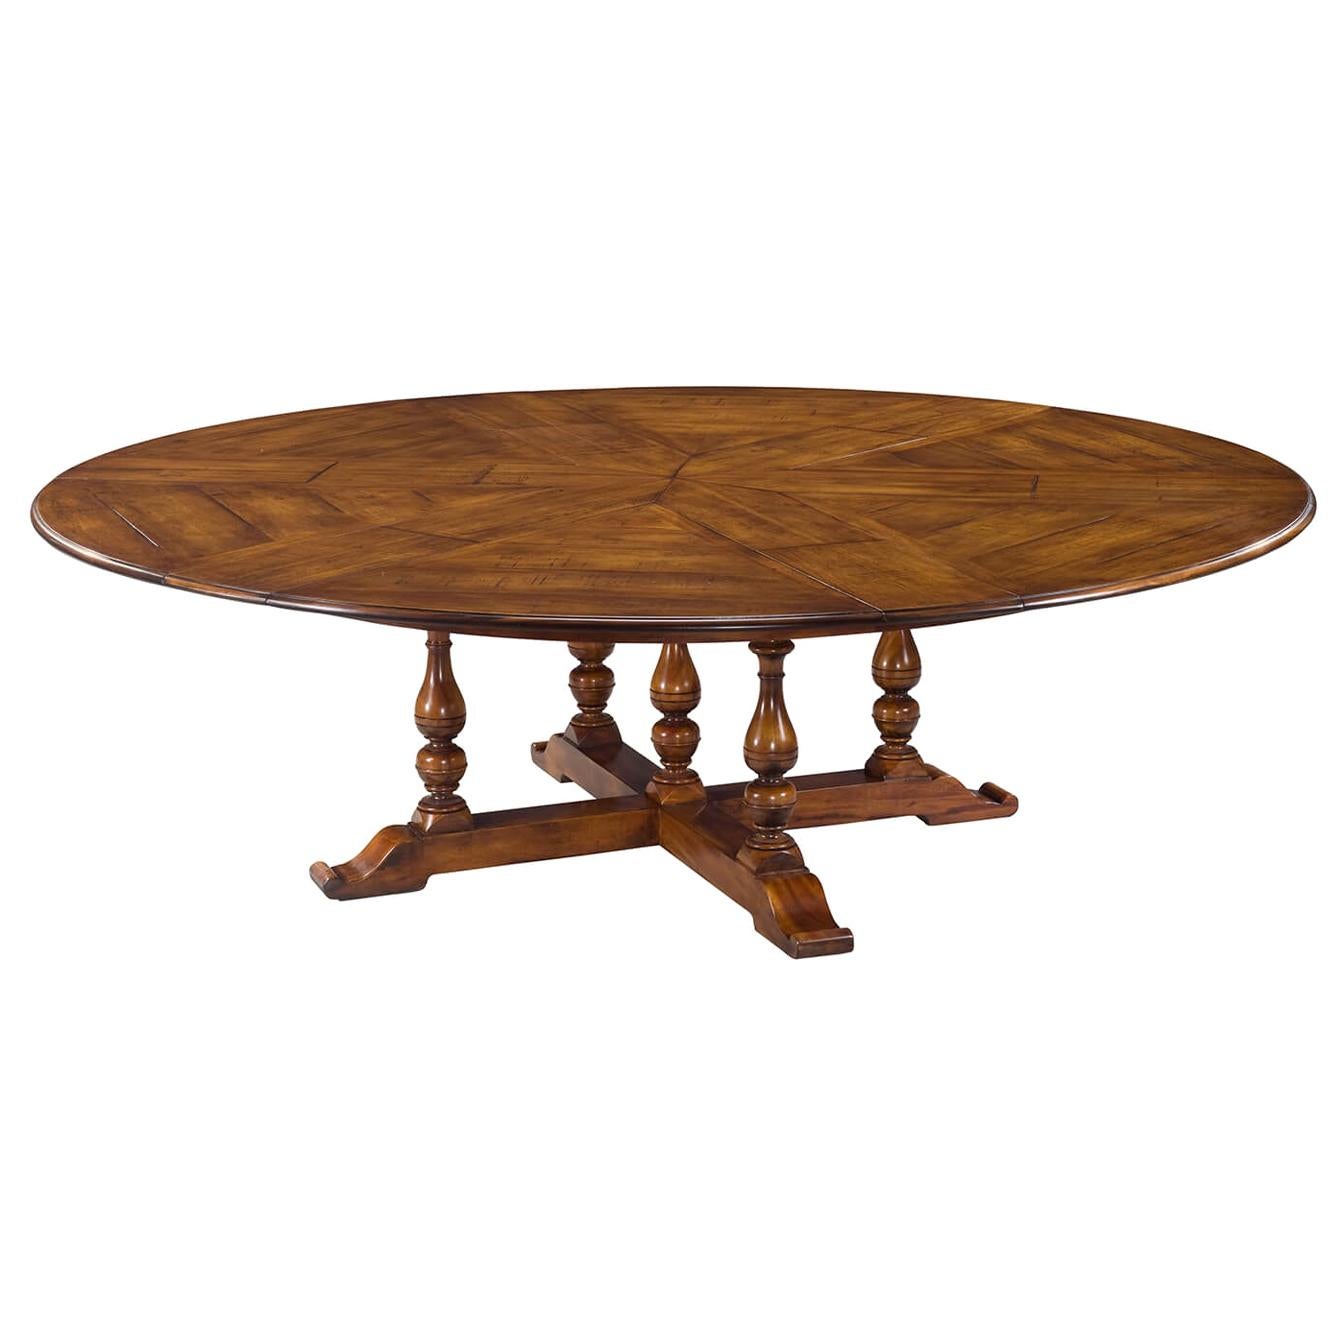 Early English Style Round Extension Dining Table